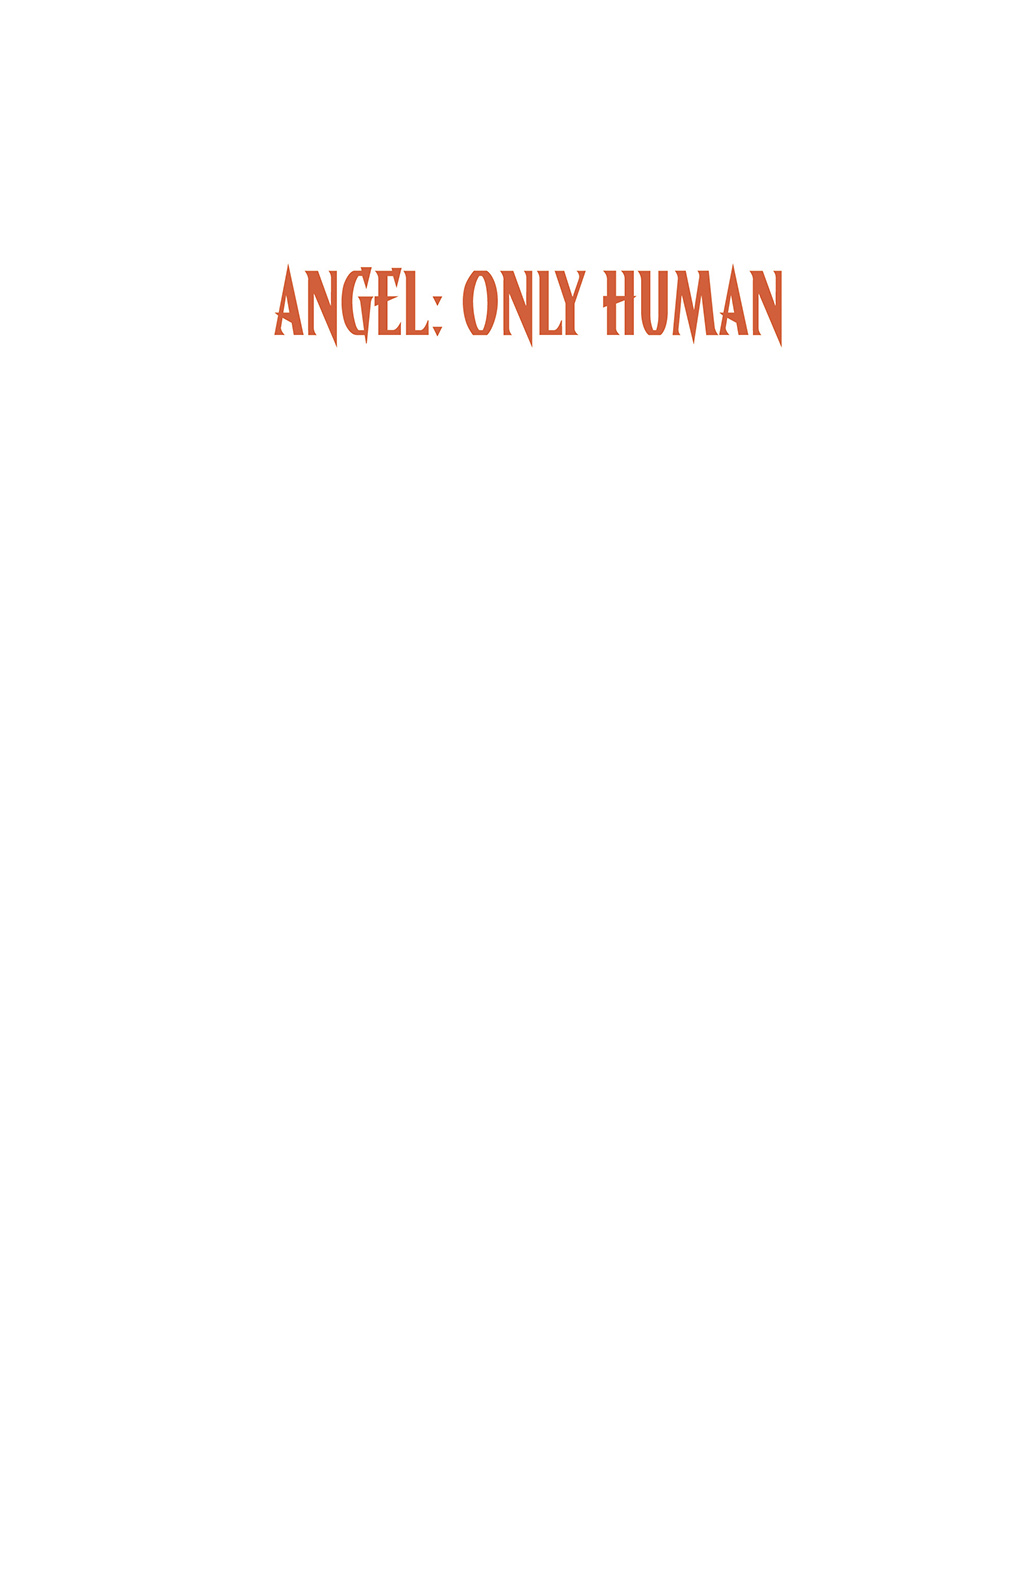 Read online Angel: Only Human comic -  Issue # TPB - 2